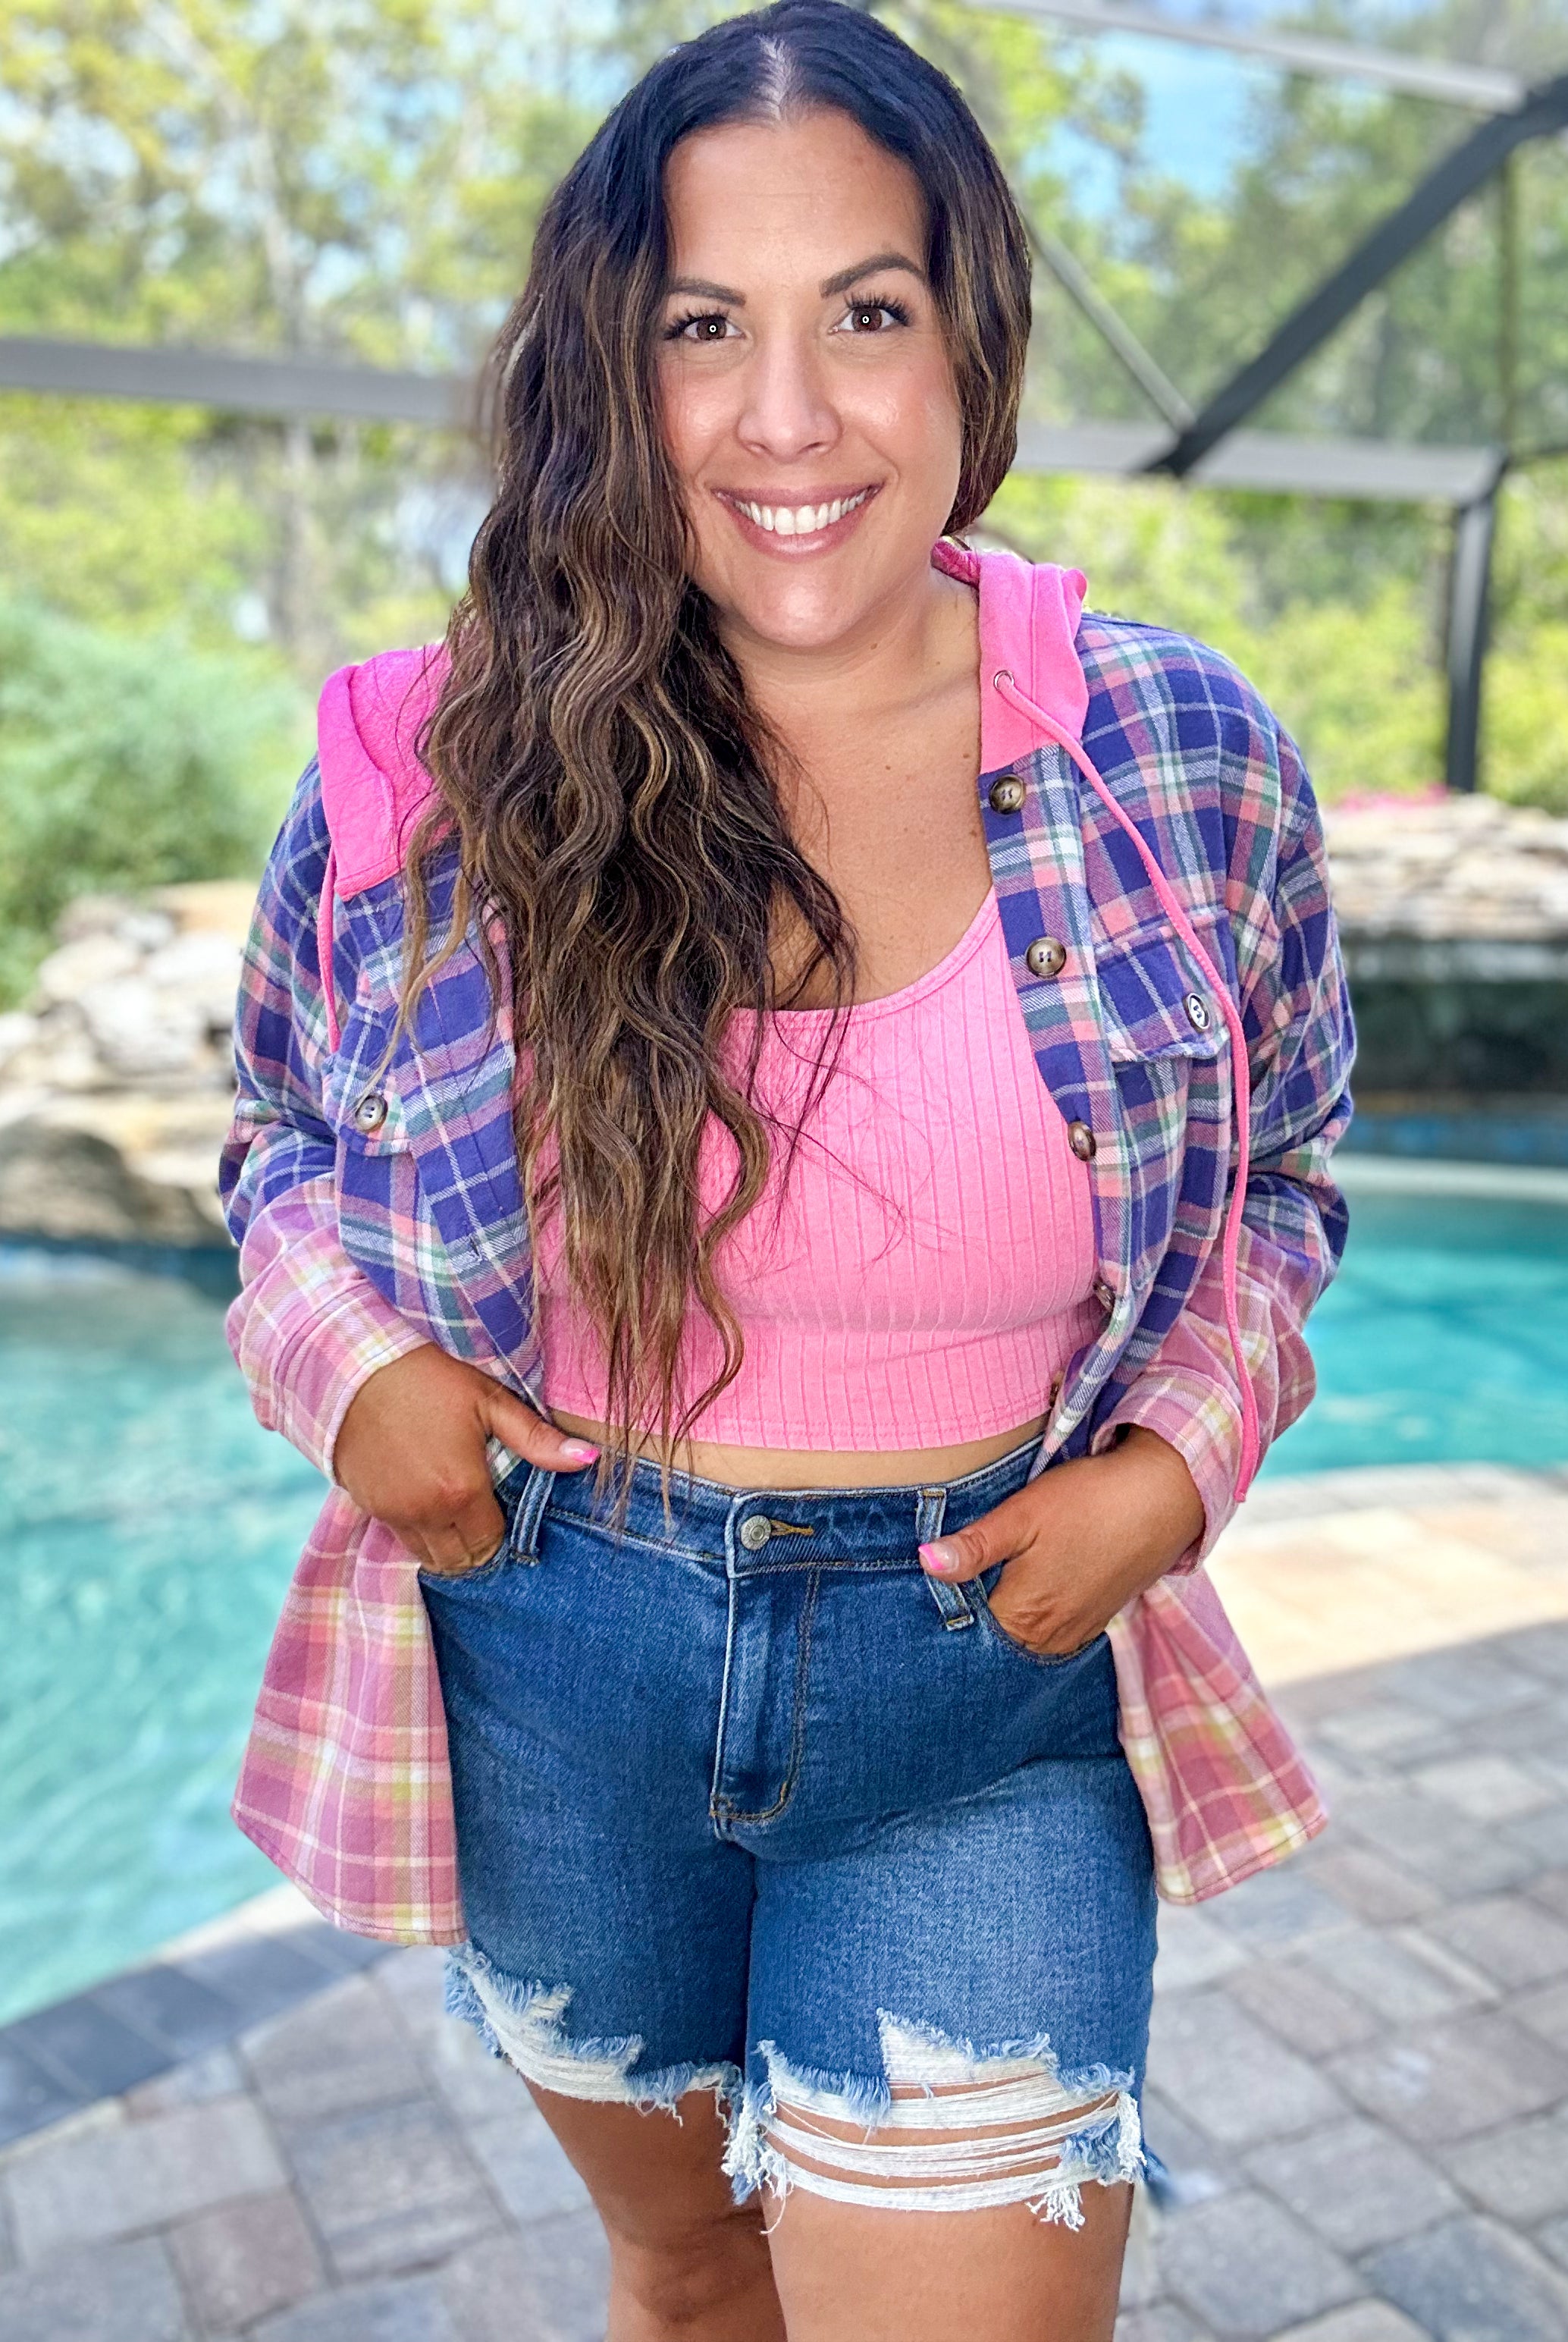 RESTOCK : Bet On It Dipped Dye Hooded Flannel-210 Hoodies-White Birch-Heathered Boho Boutique, Women's Fashion and Accessories in Palmetto, FL